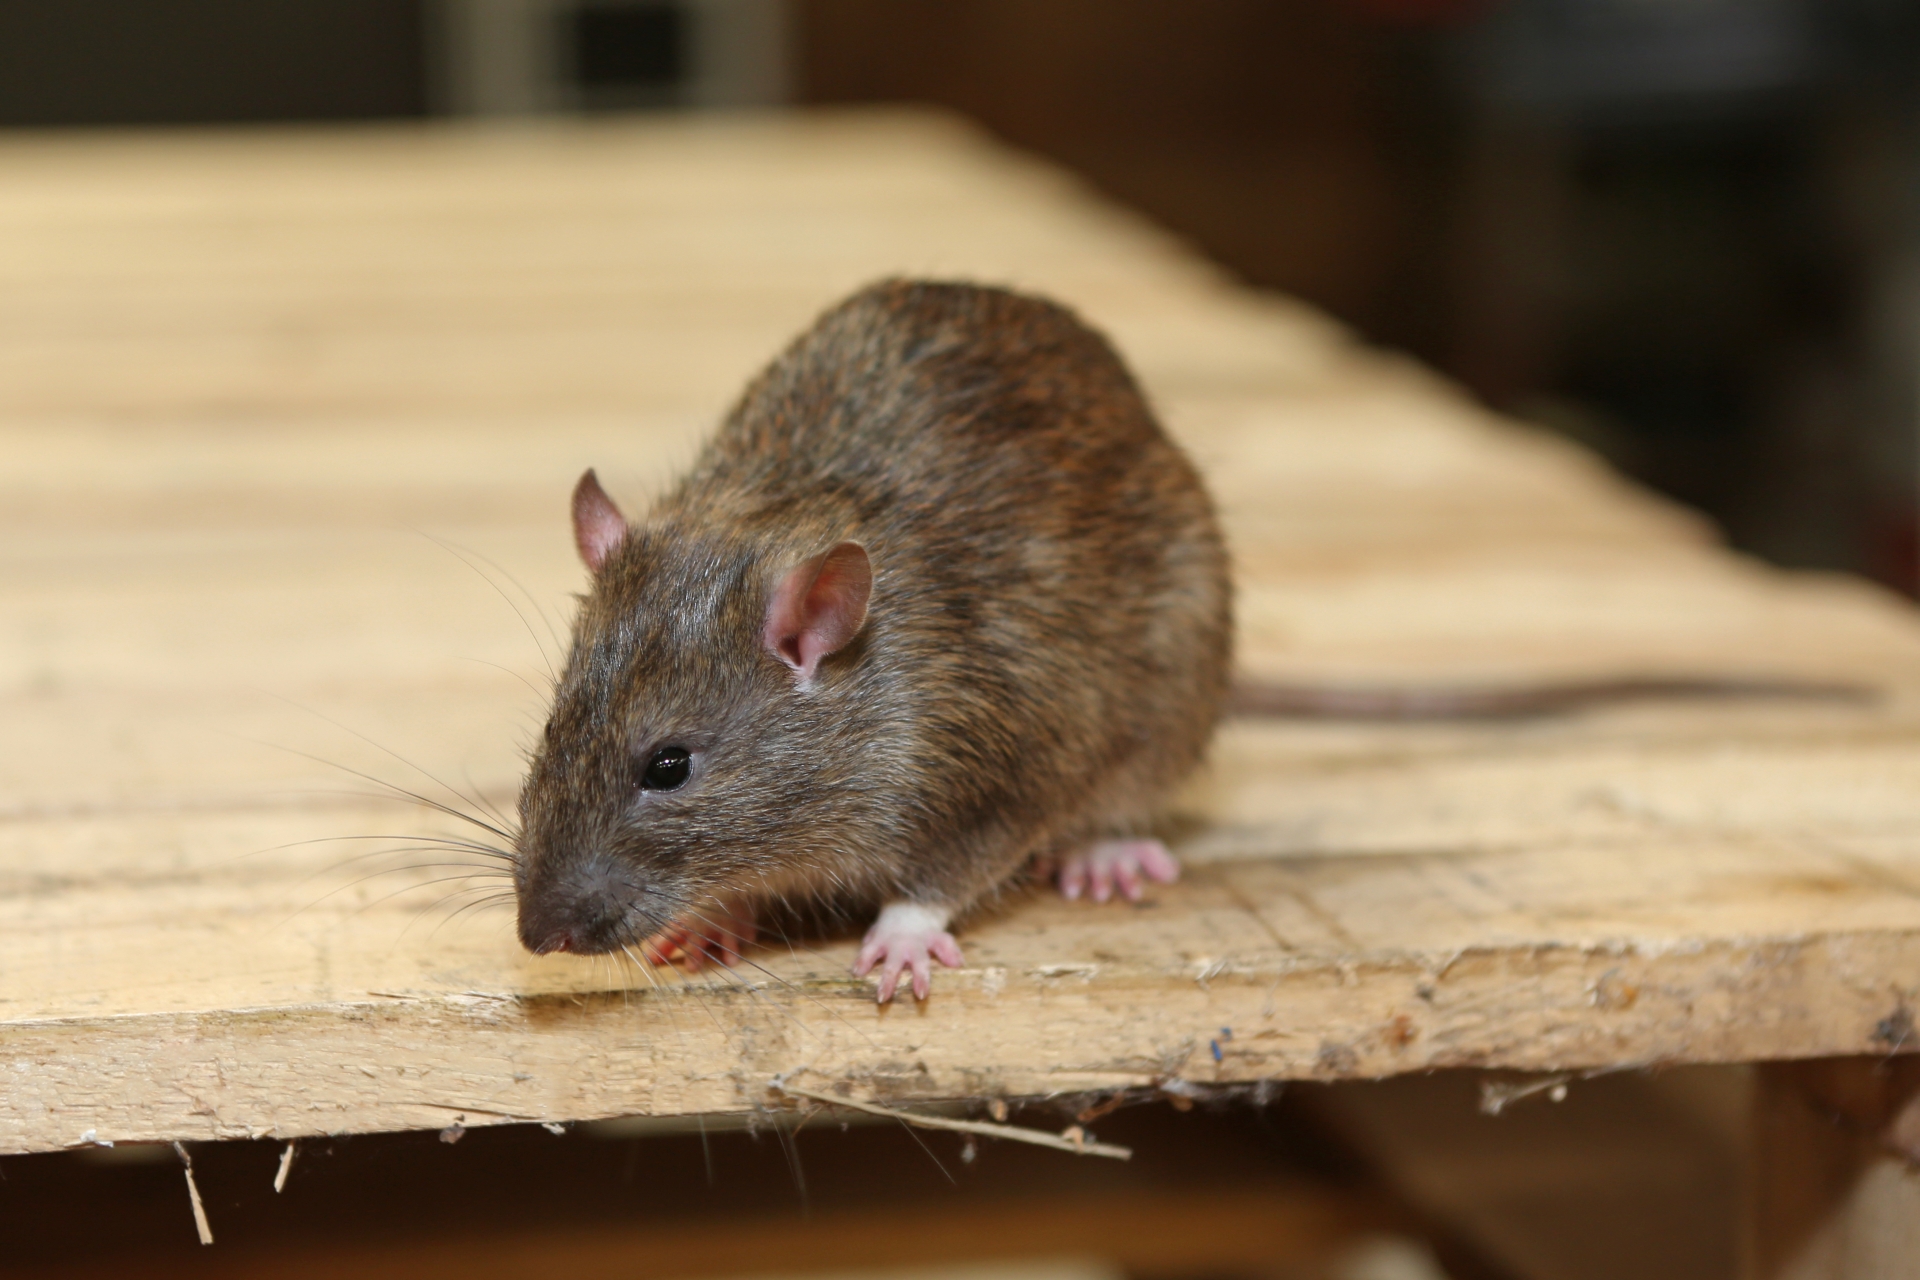 Rat Control, Pest Control in Bloomsbury, Gray's Inn, WC1. Call Now 020 8166 9746